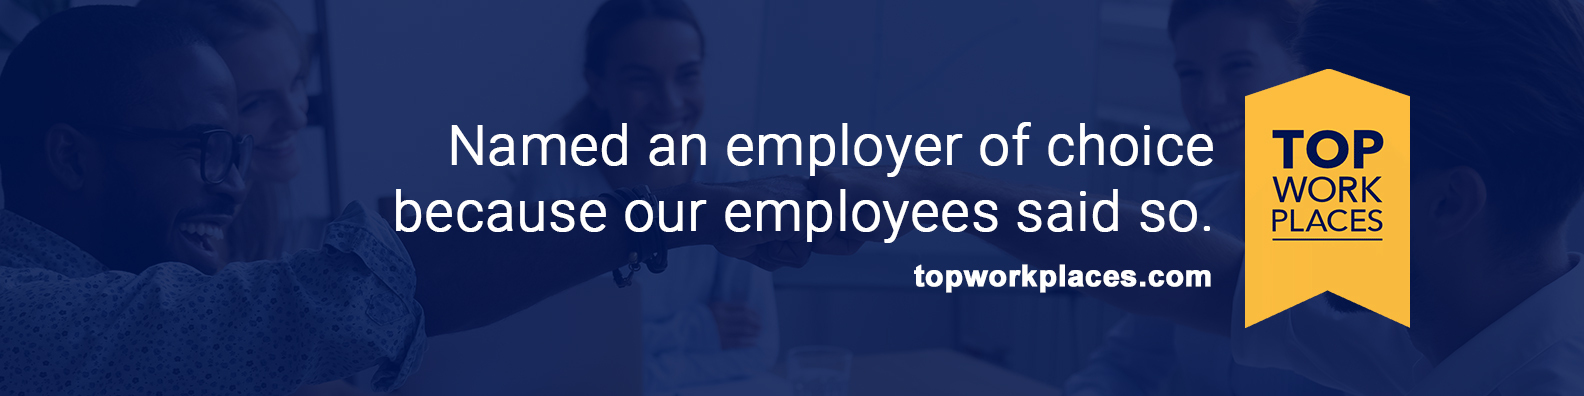 Named an employer of choice because our employees said so.